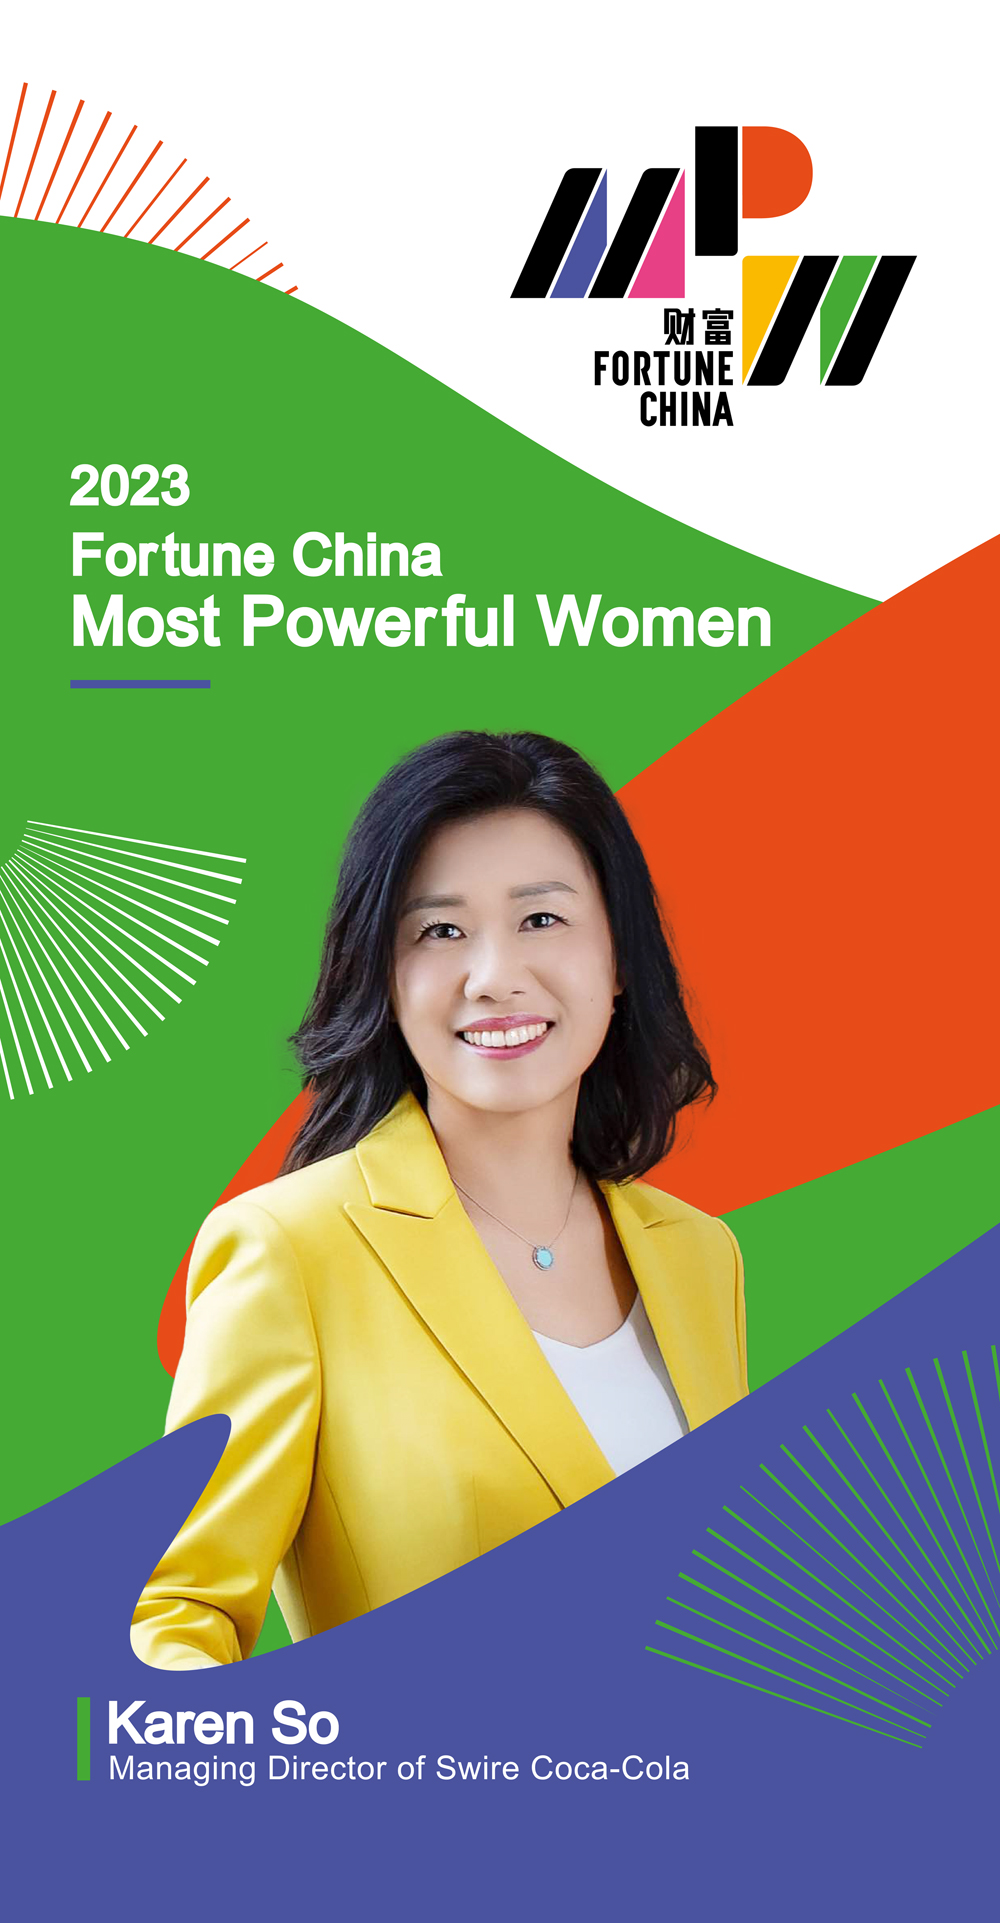 Karen So Named to Fortune China's Top 50 Most Powerful Women in Business